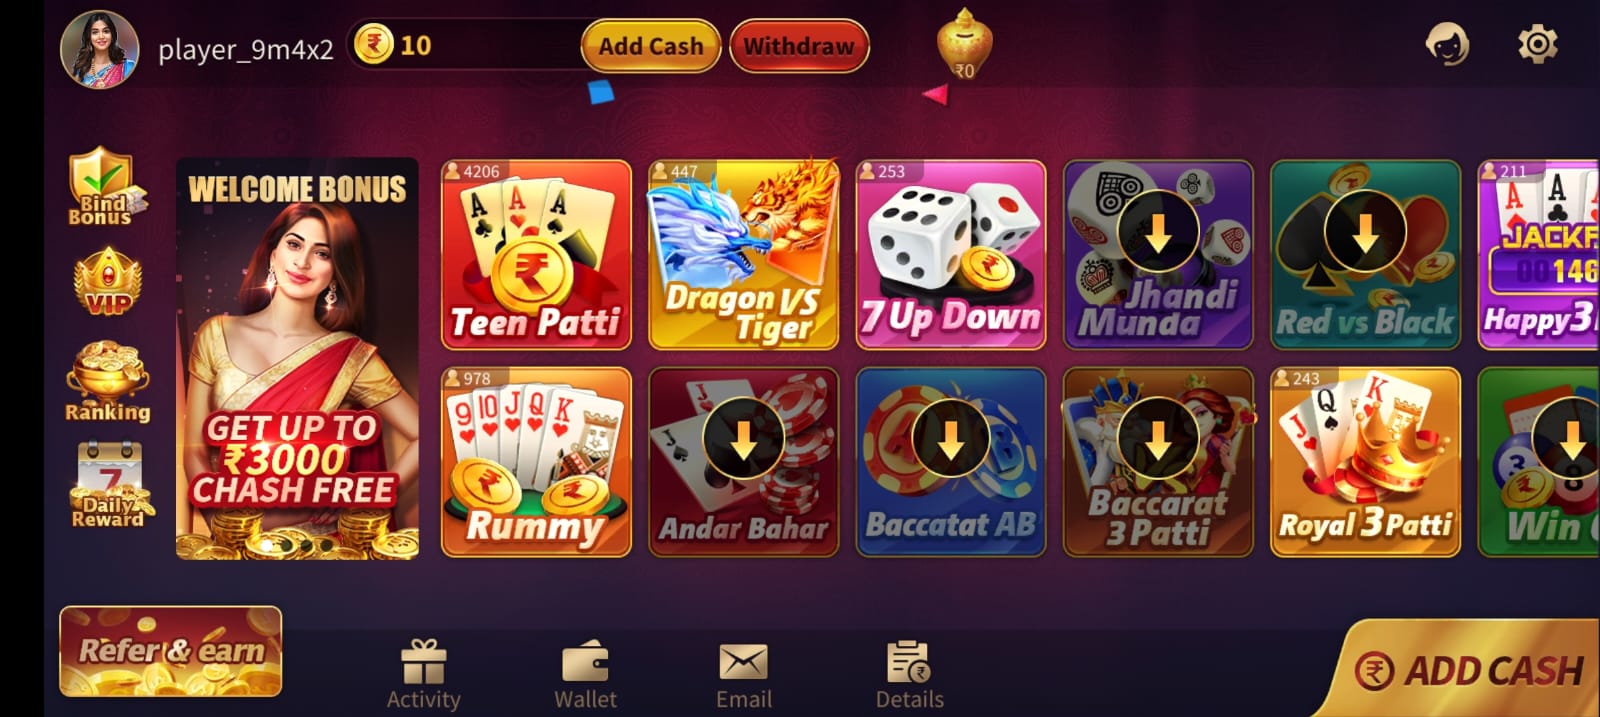 Available Games On Rummy Raja App